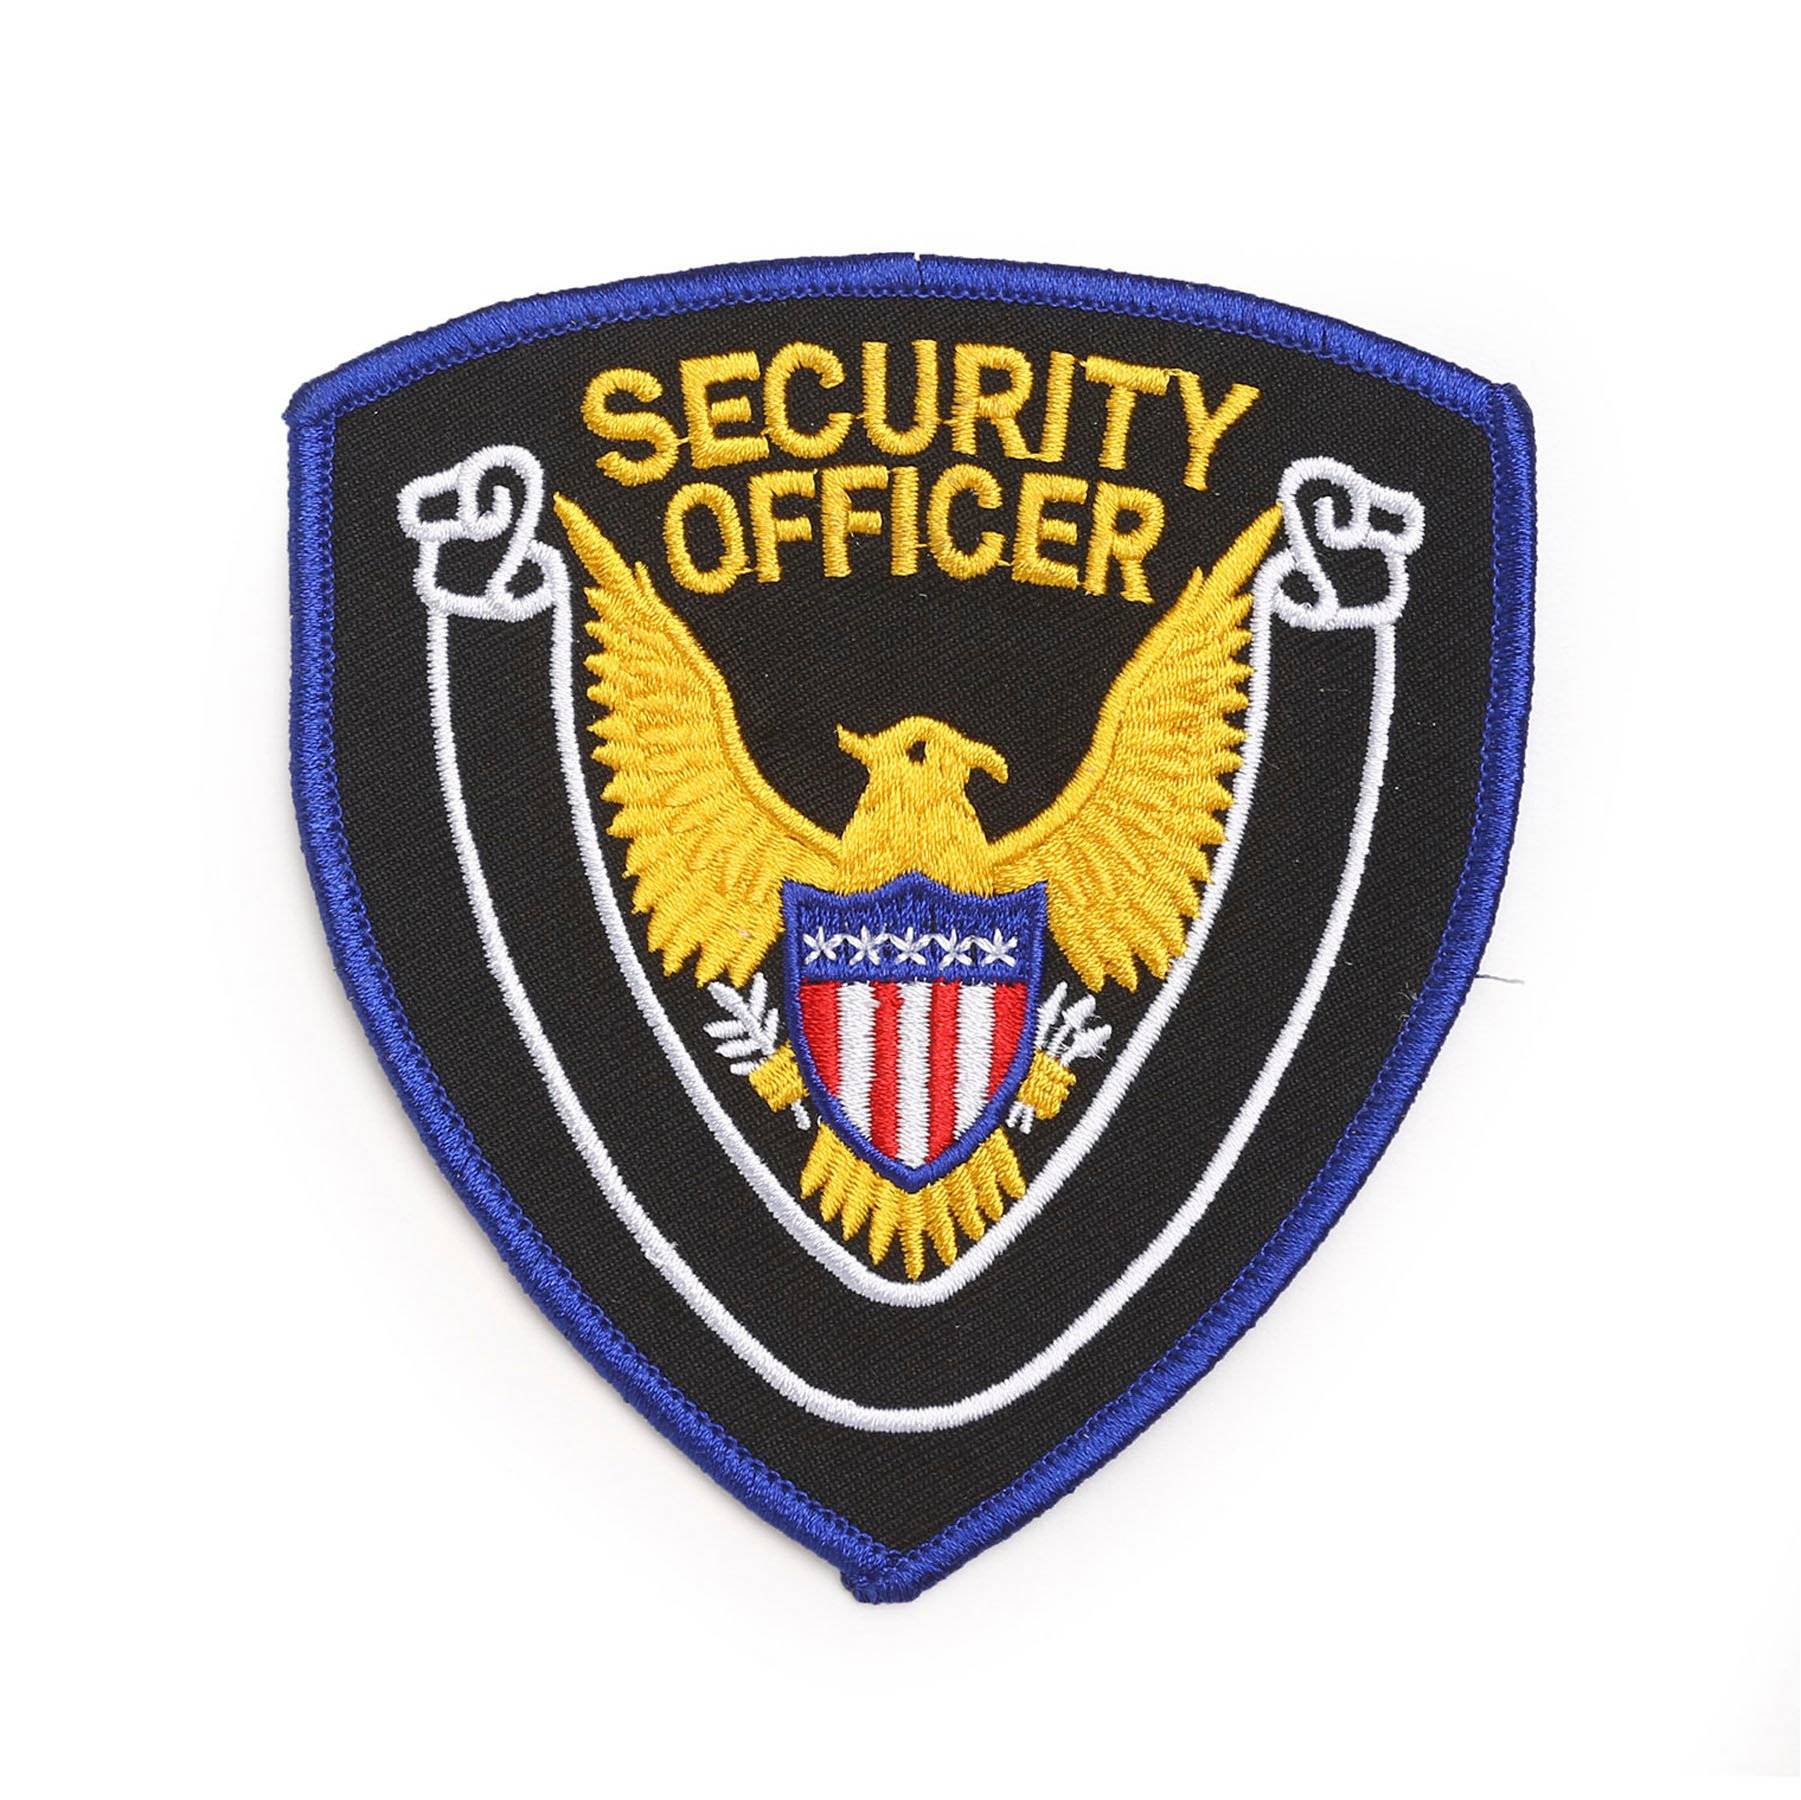 LAWPRO SECURITY OFFICER SHOULDER PATCH WITH SCROLL